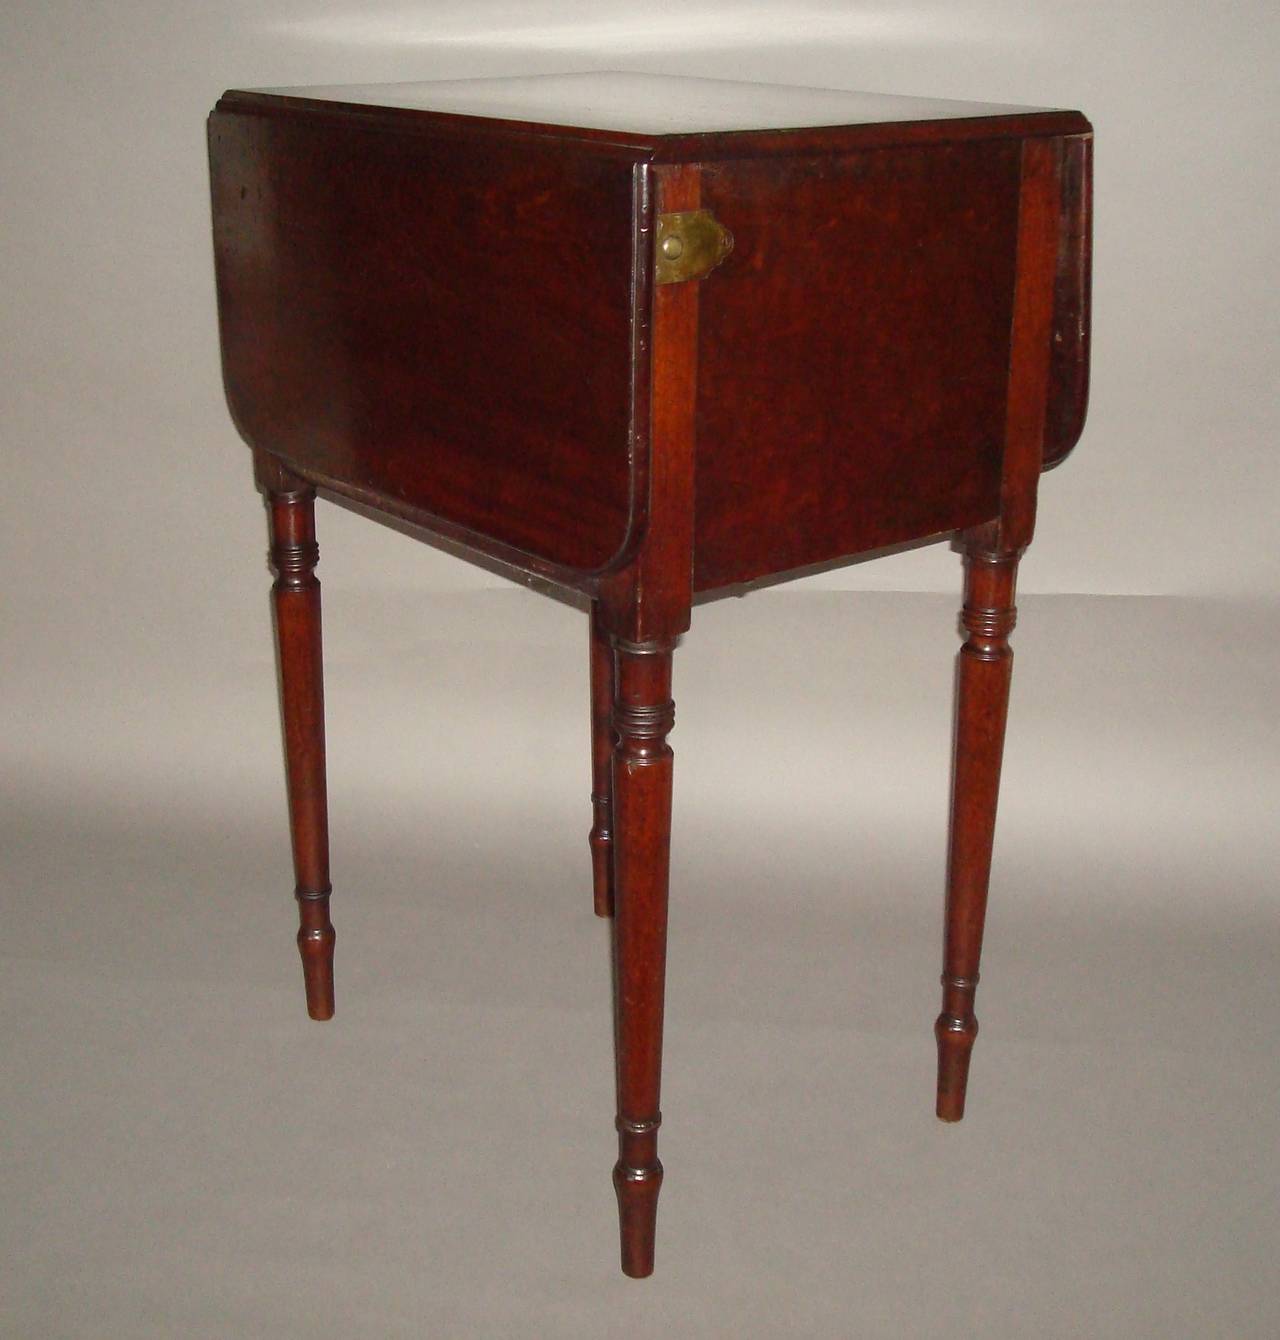 A rare Regency mahogany deception table, the rectangular top with a moulded edge and a conventional drop leaf to the one side, and a fall front to the other side disguised as a drop leaf, released with brass release buttons to either side and brass